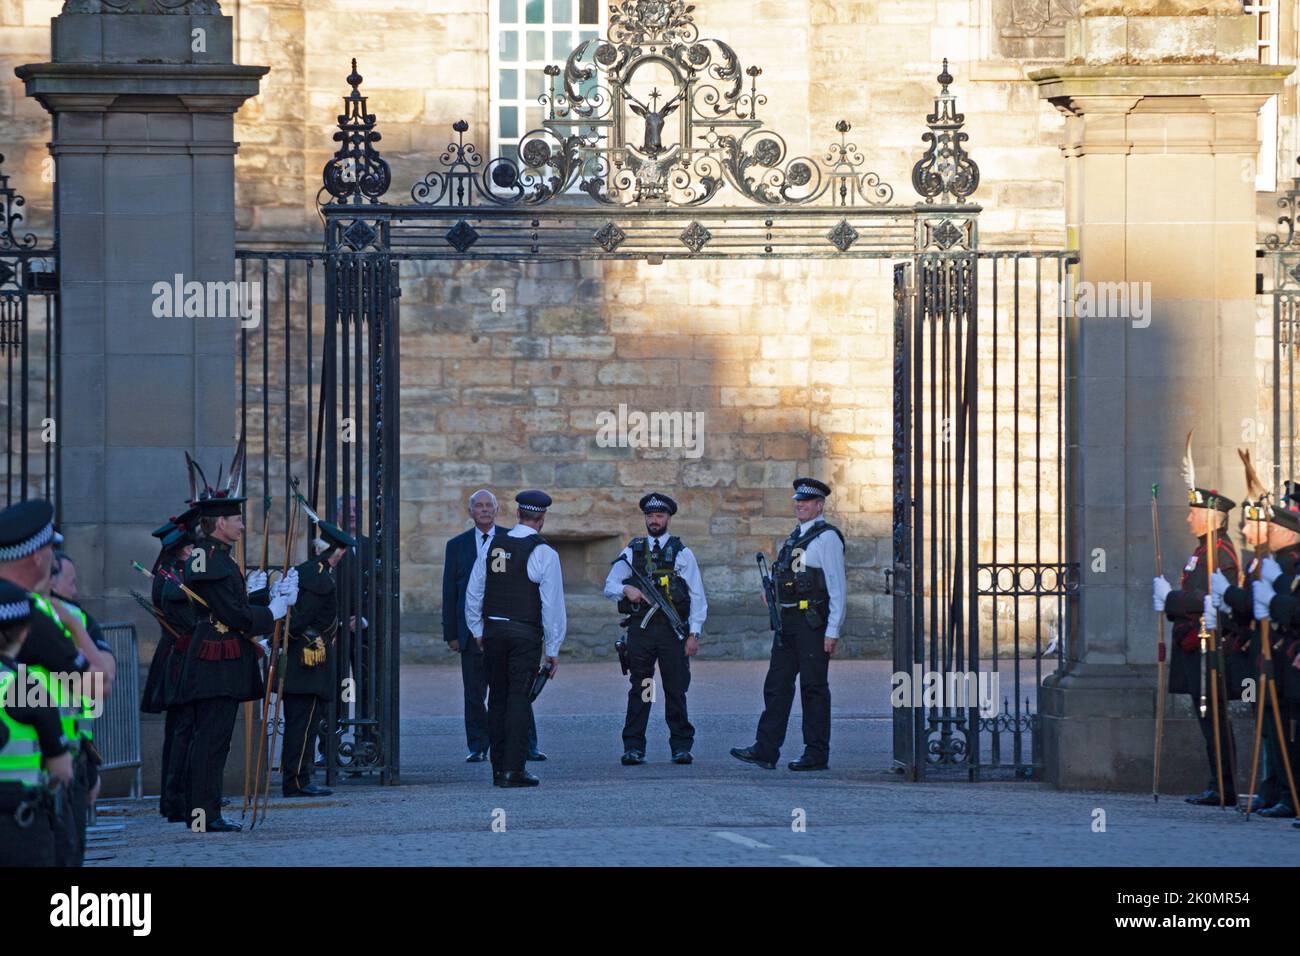 Holyrood, Edinburgh, Scotland, UK. 12th September 2022. Security for King Charles 111 at Scottish Parliament and  Holyrood Palace. Pictured: Armerd Polic officers stand at the gates of Holyrood Palace together with The Royal Company of Archers who were previously the official bodyguards of the Queen when she was in Scotland. Credit: Arch White/alamy live news. Stock Photo